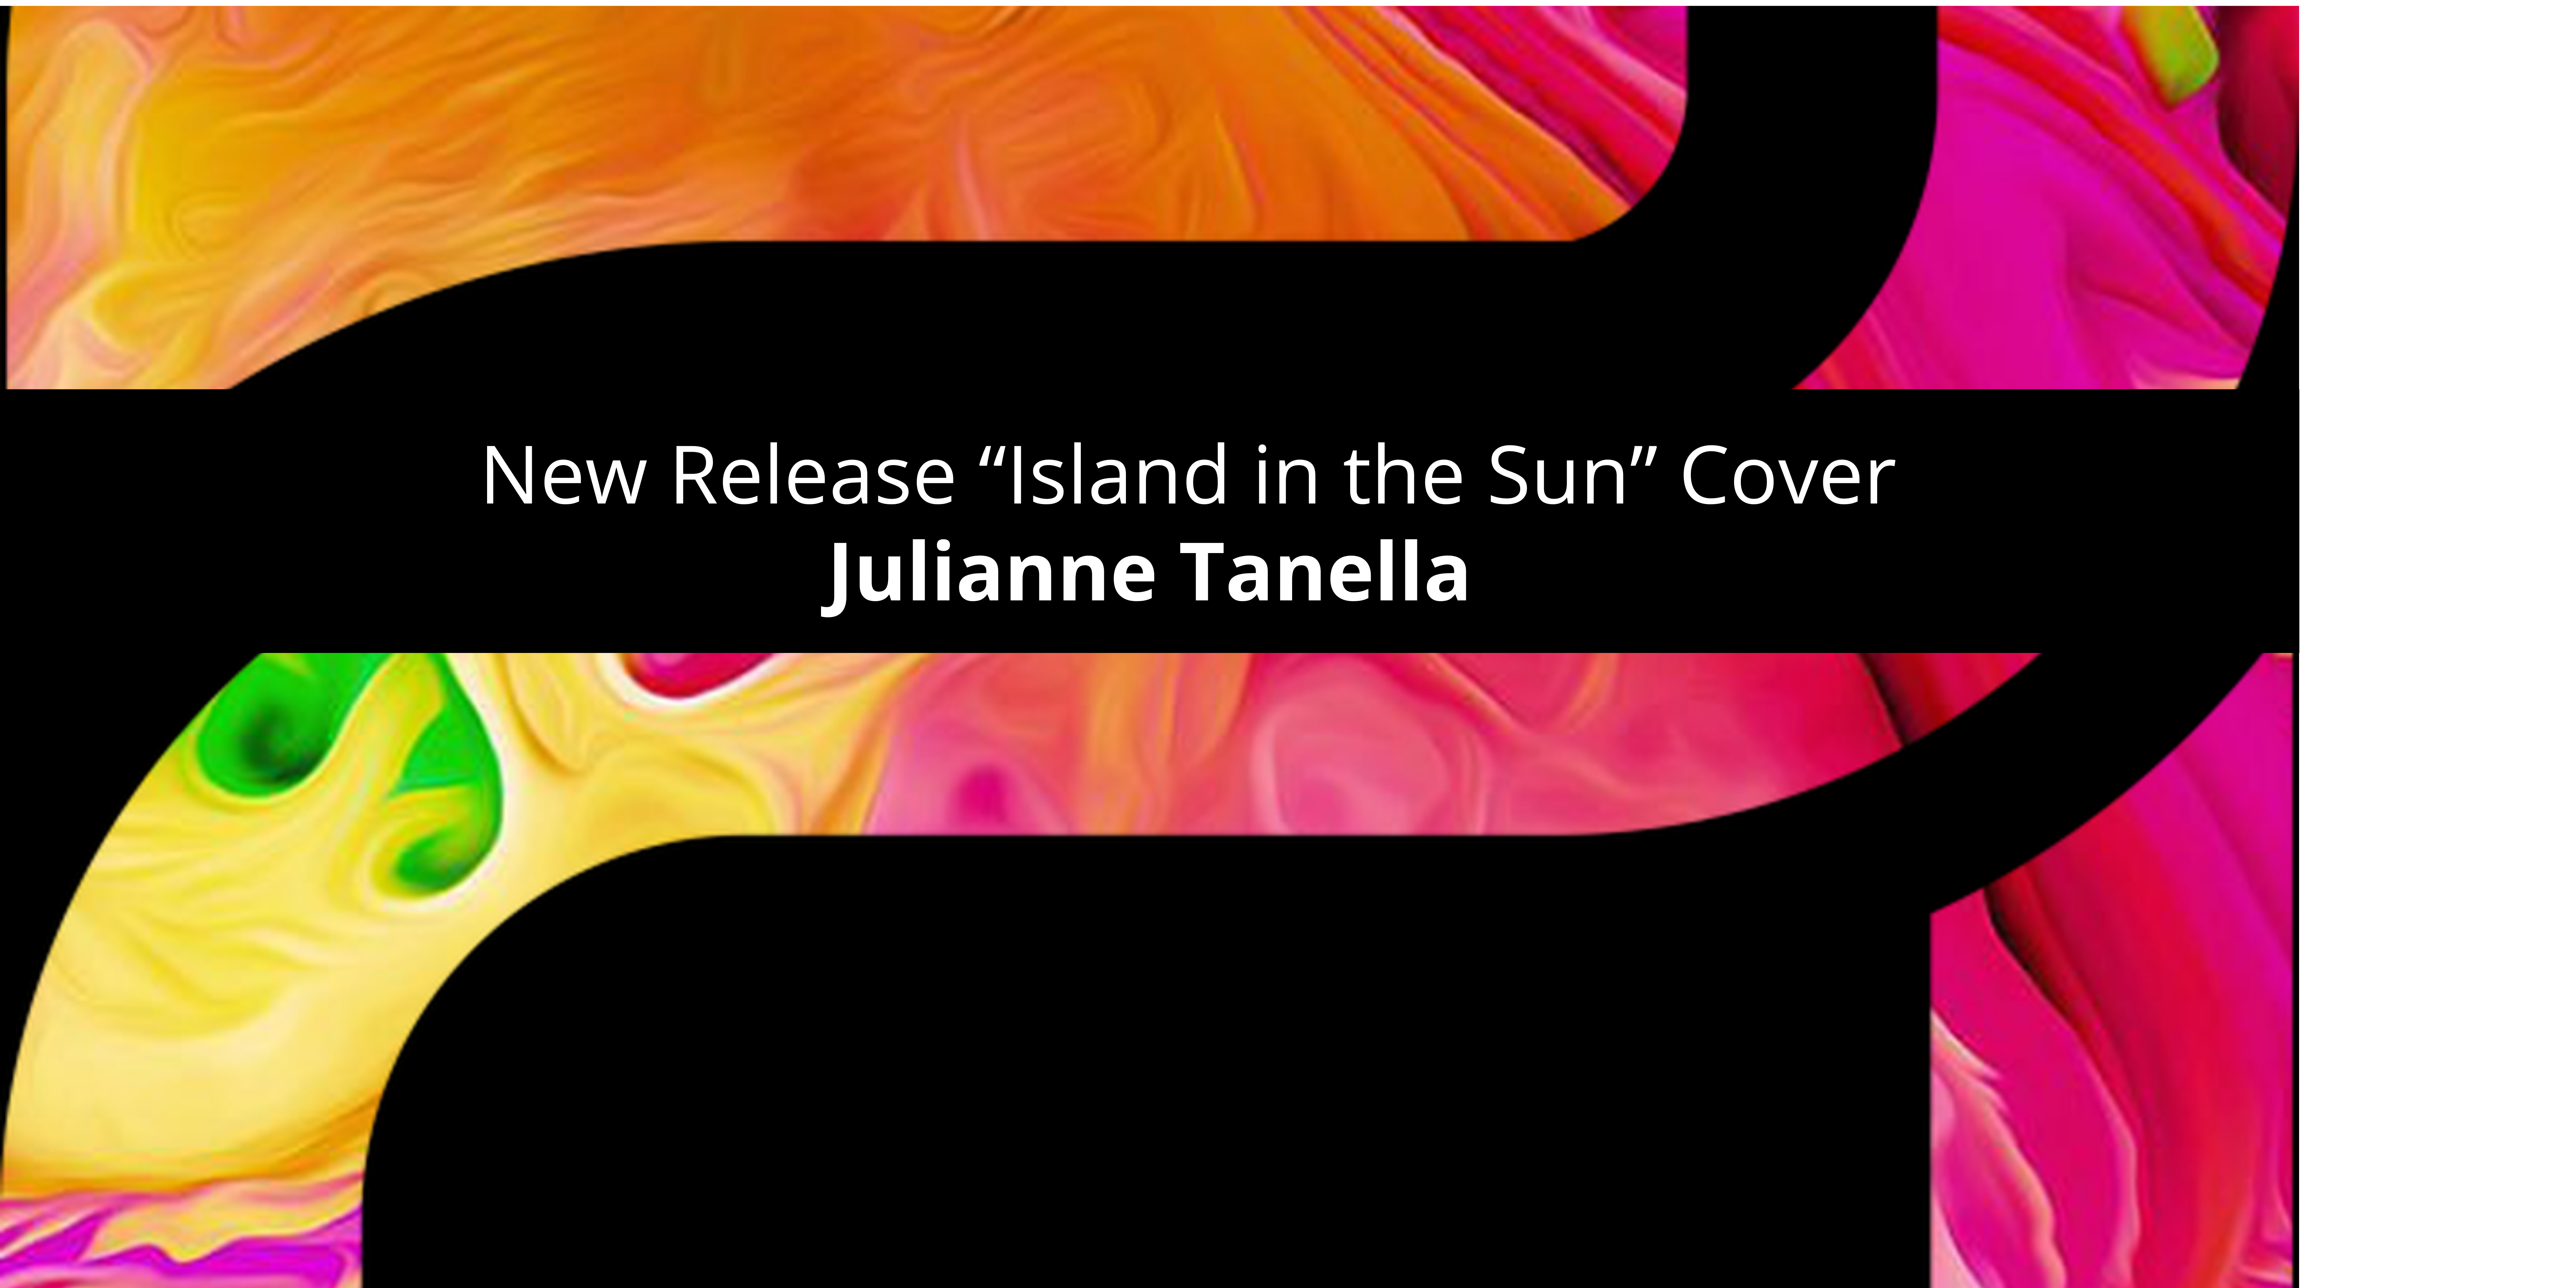 New Release from Julianne Tanella “Island in the Sun” Cover